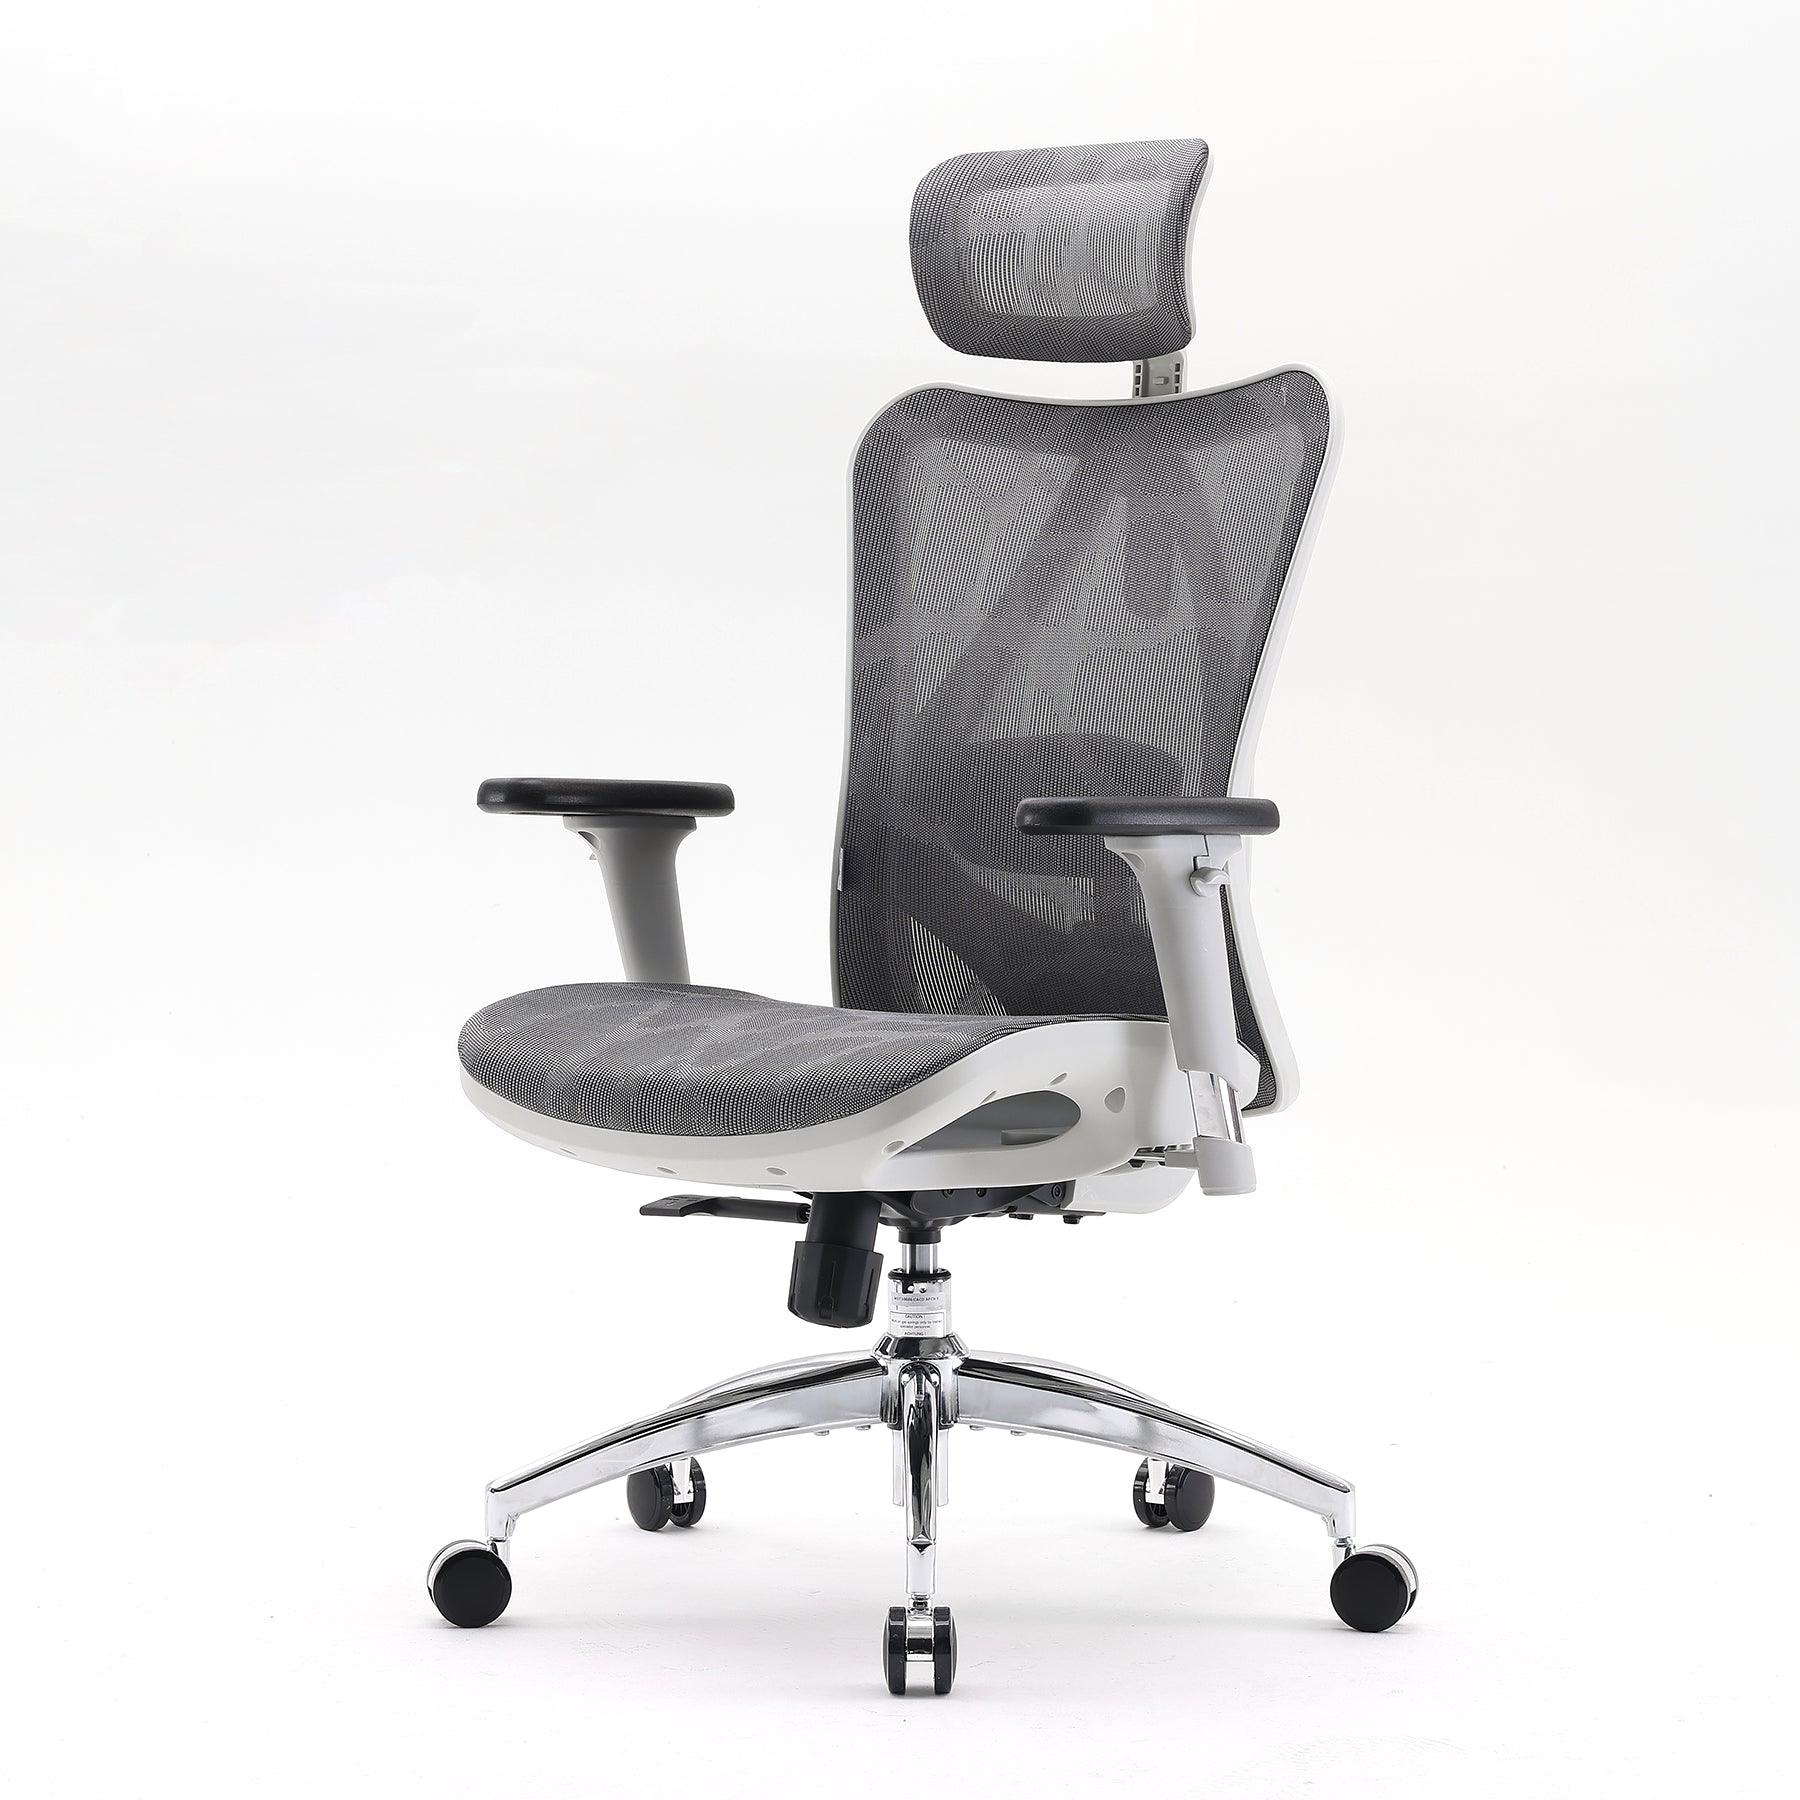 Sihoo M101C High-Back Ergonomic Office Chair with S-Shaped Backrest